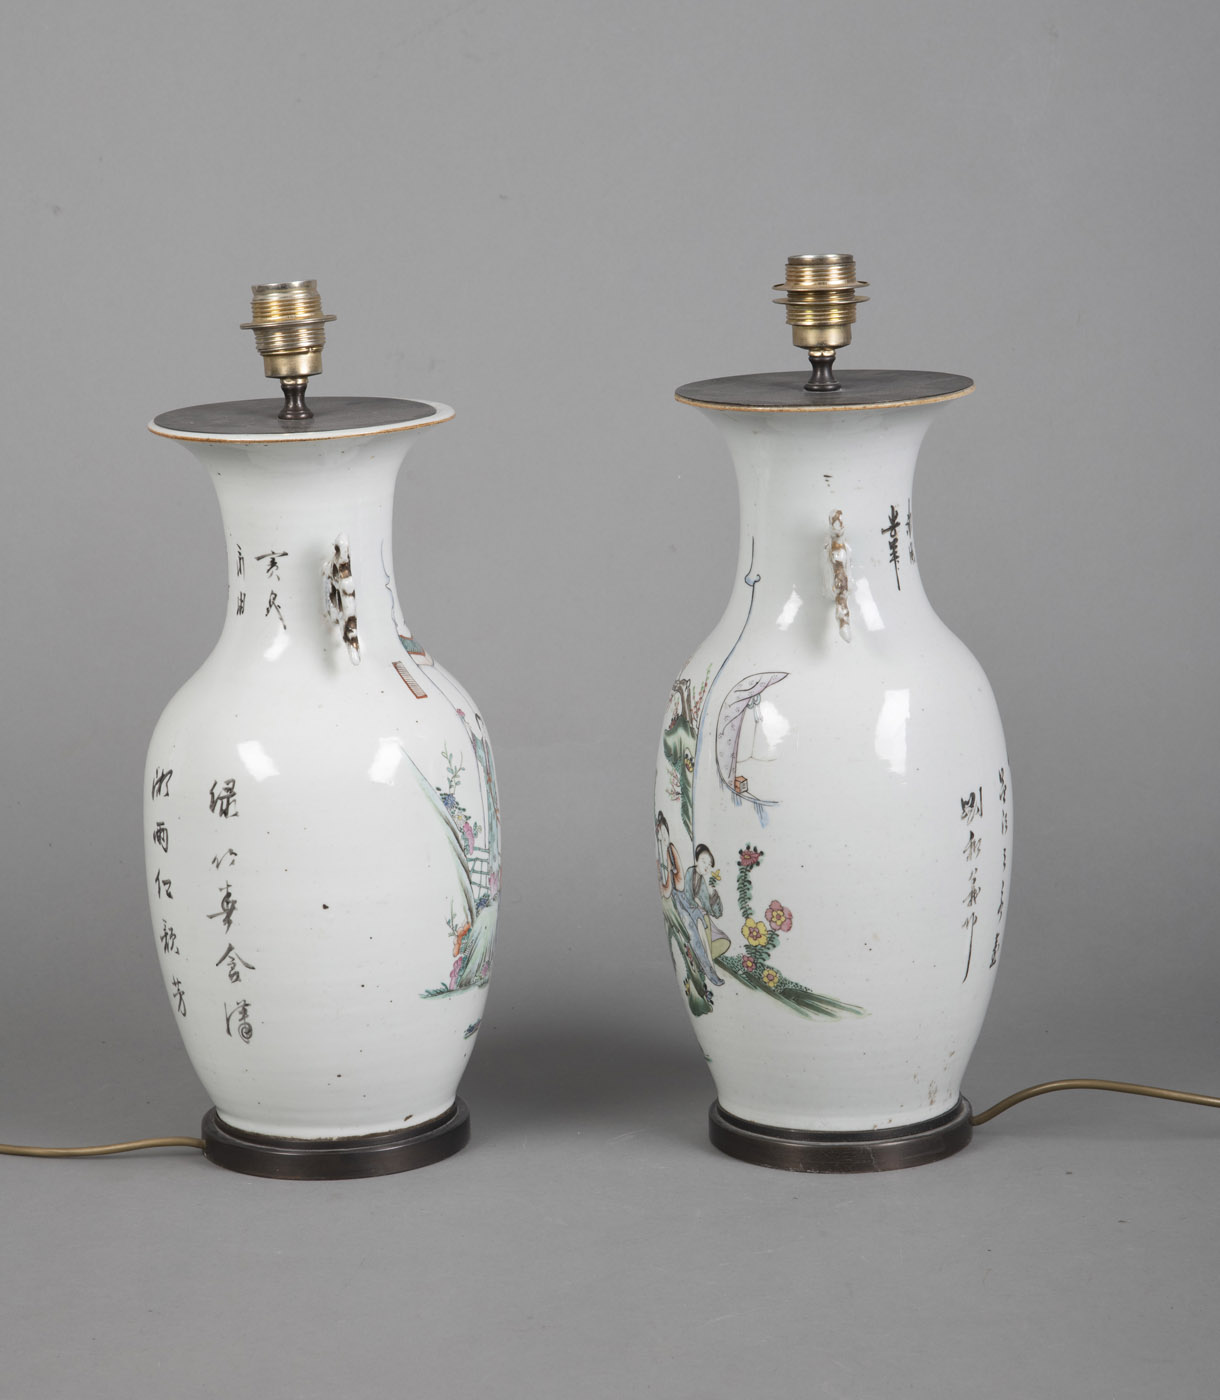 A PAIR OF POLYCHROME PAINTED PORCELAIN VASES DEPICTING LADIES IN A GARDEN, MOUNTED AS LAMPS - Image 2 of 4